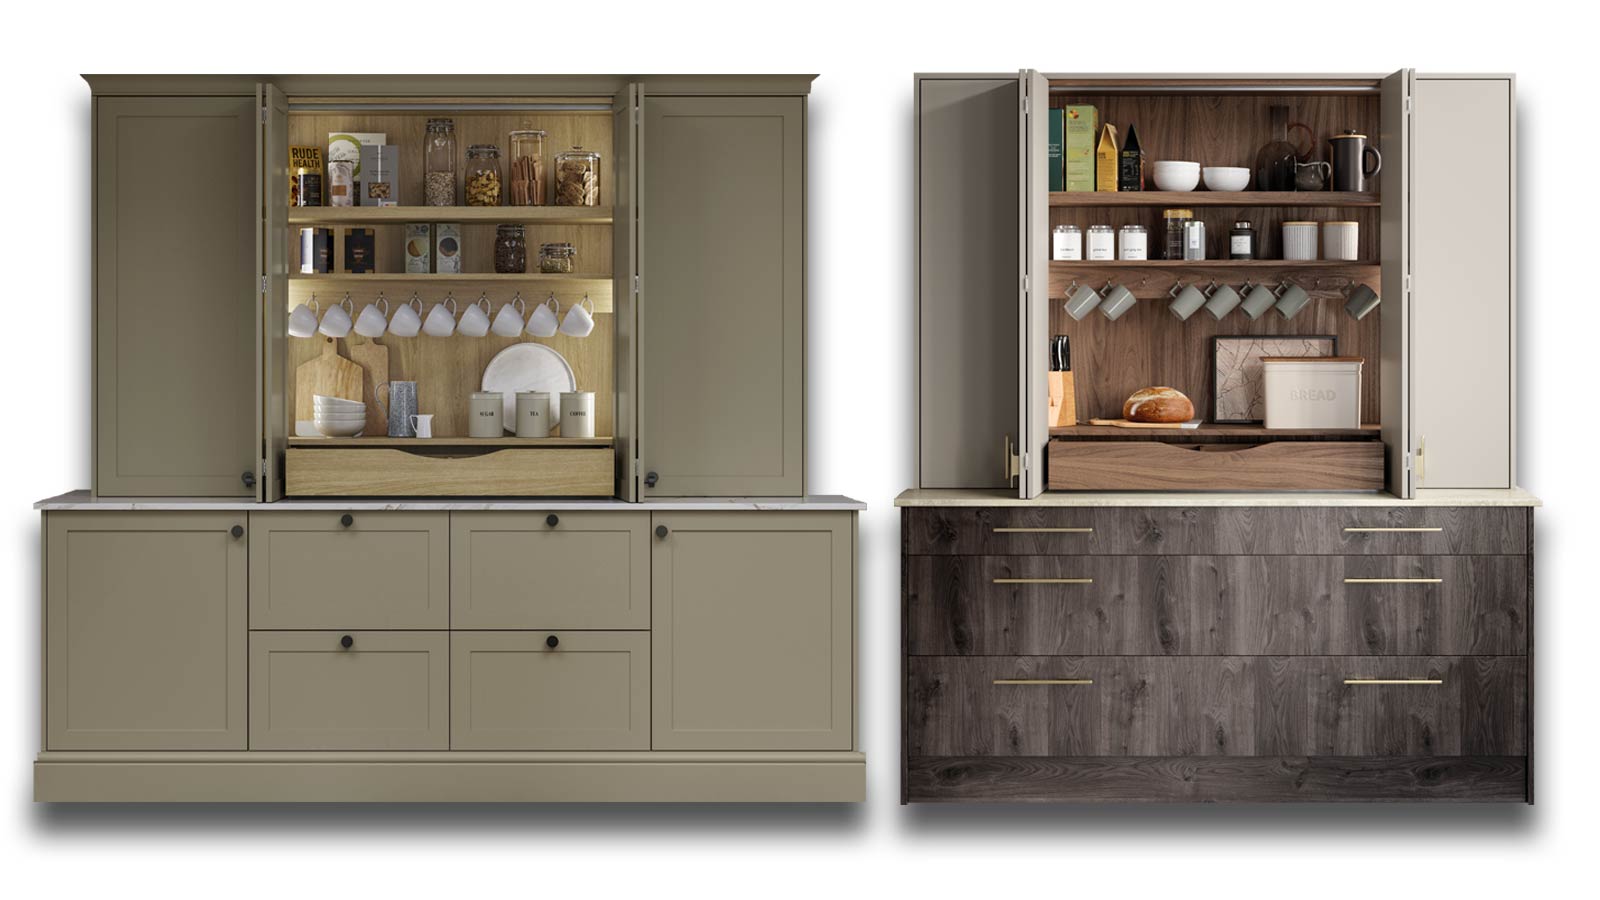 A Masterclass Breakfast Dresser in sage green and pale grey